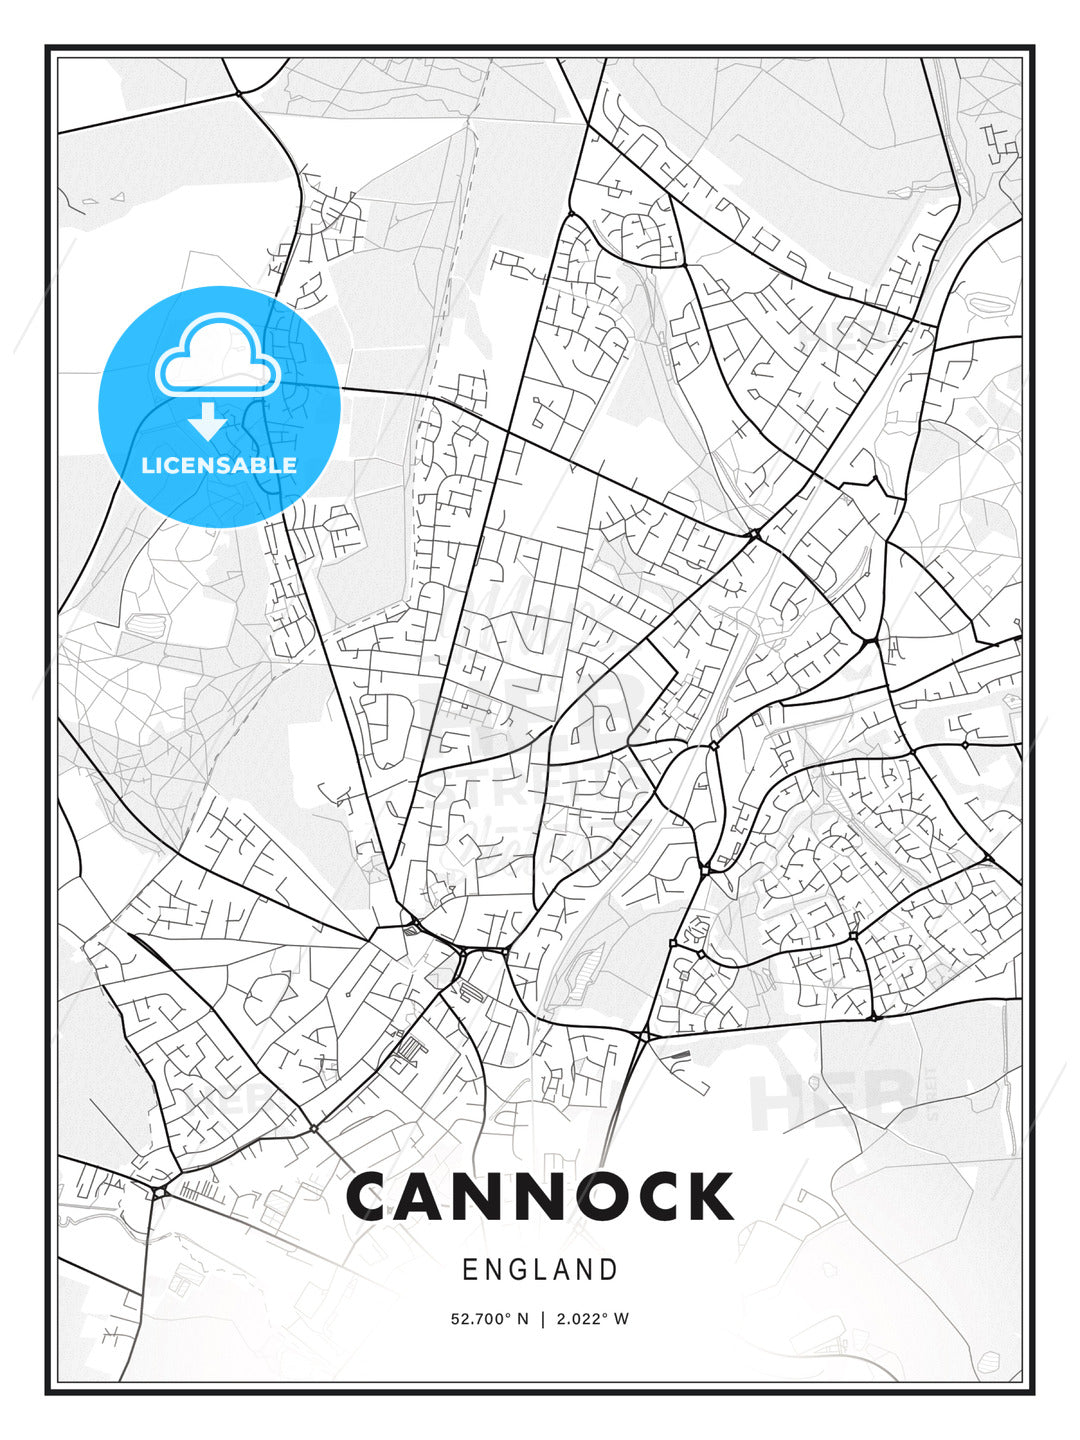 Cannock, England, Modern Print Template in Various Formats - HEBSTREITS Sketches